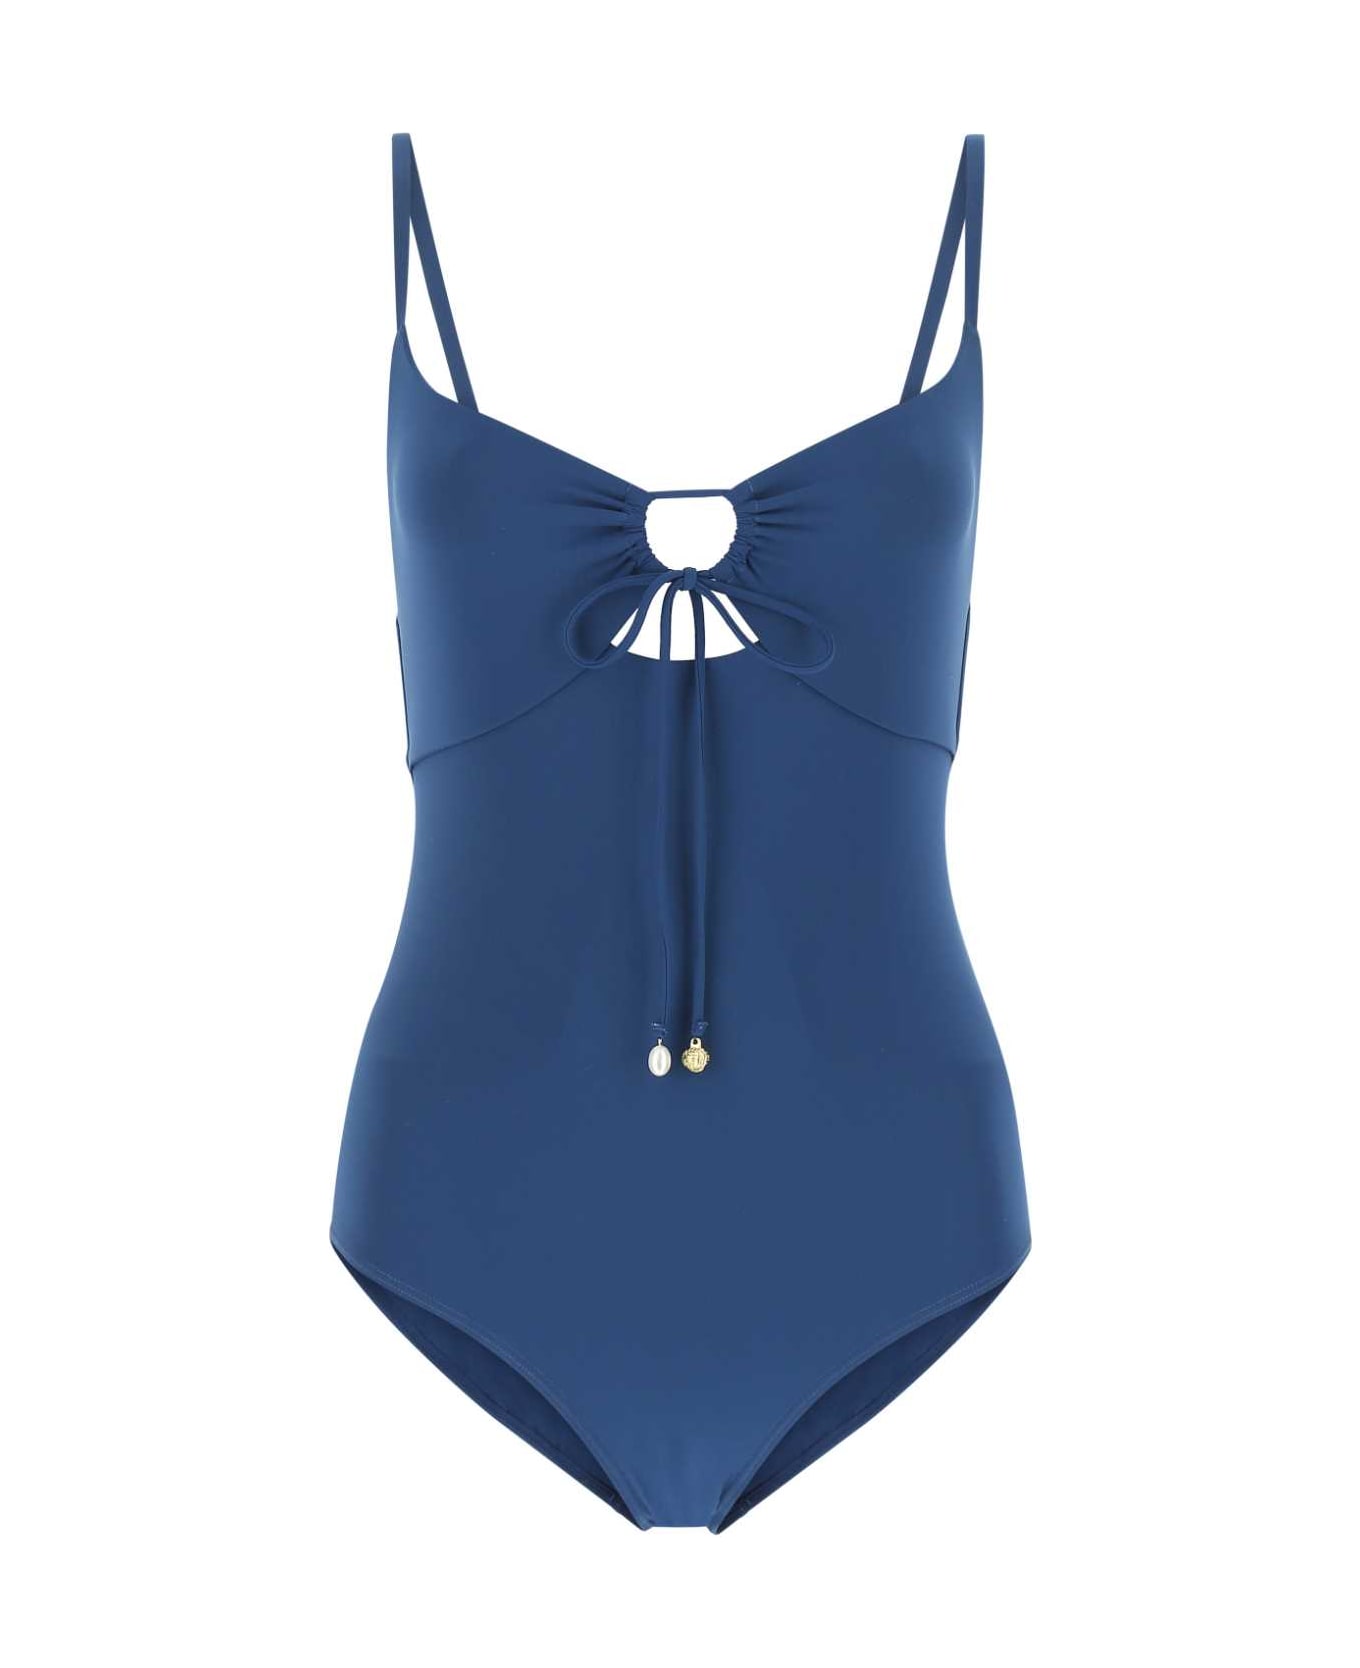 Tory Burch Teal Green Stretch Nylon Swimsuit - 400